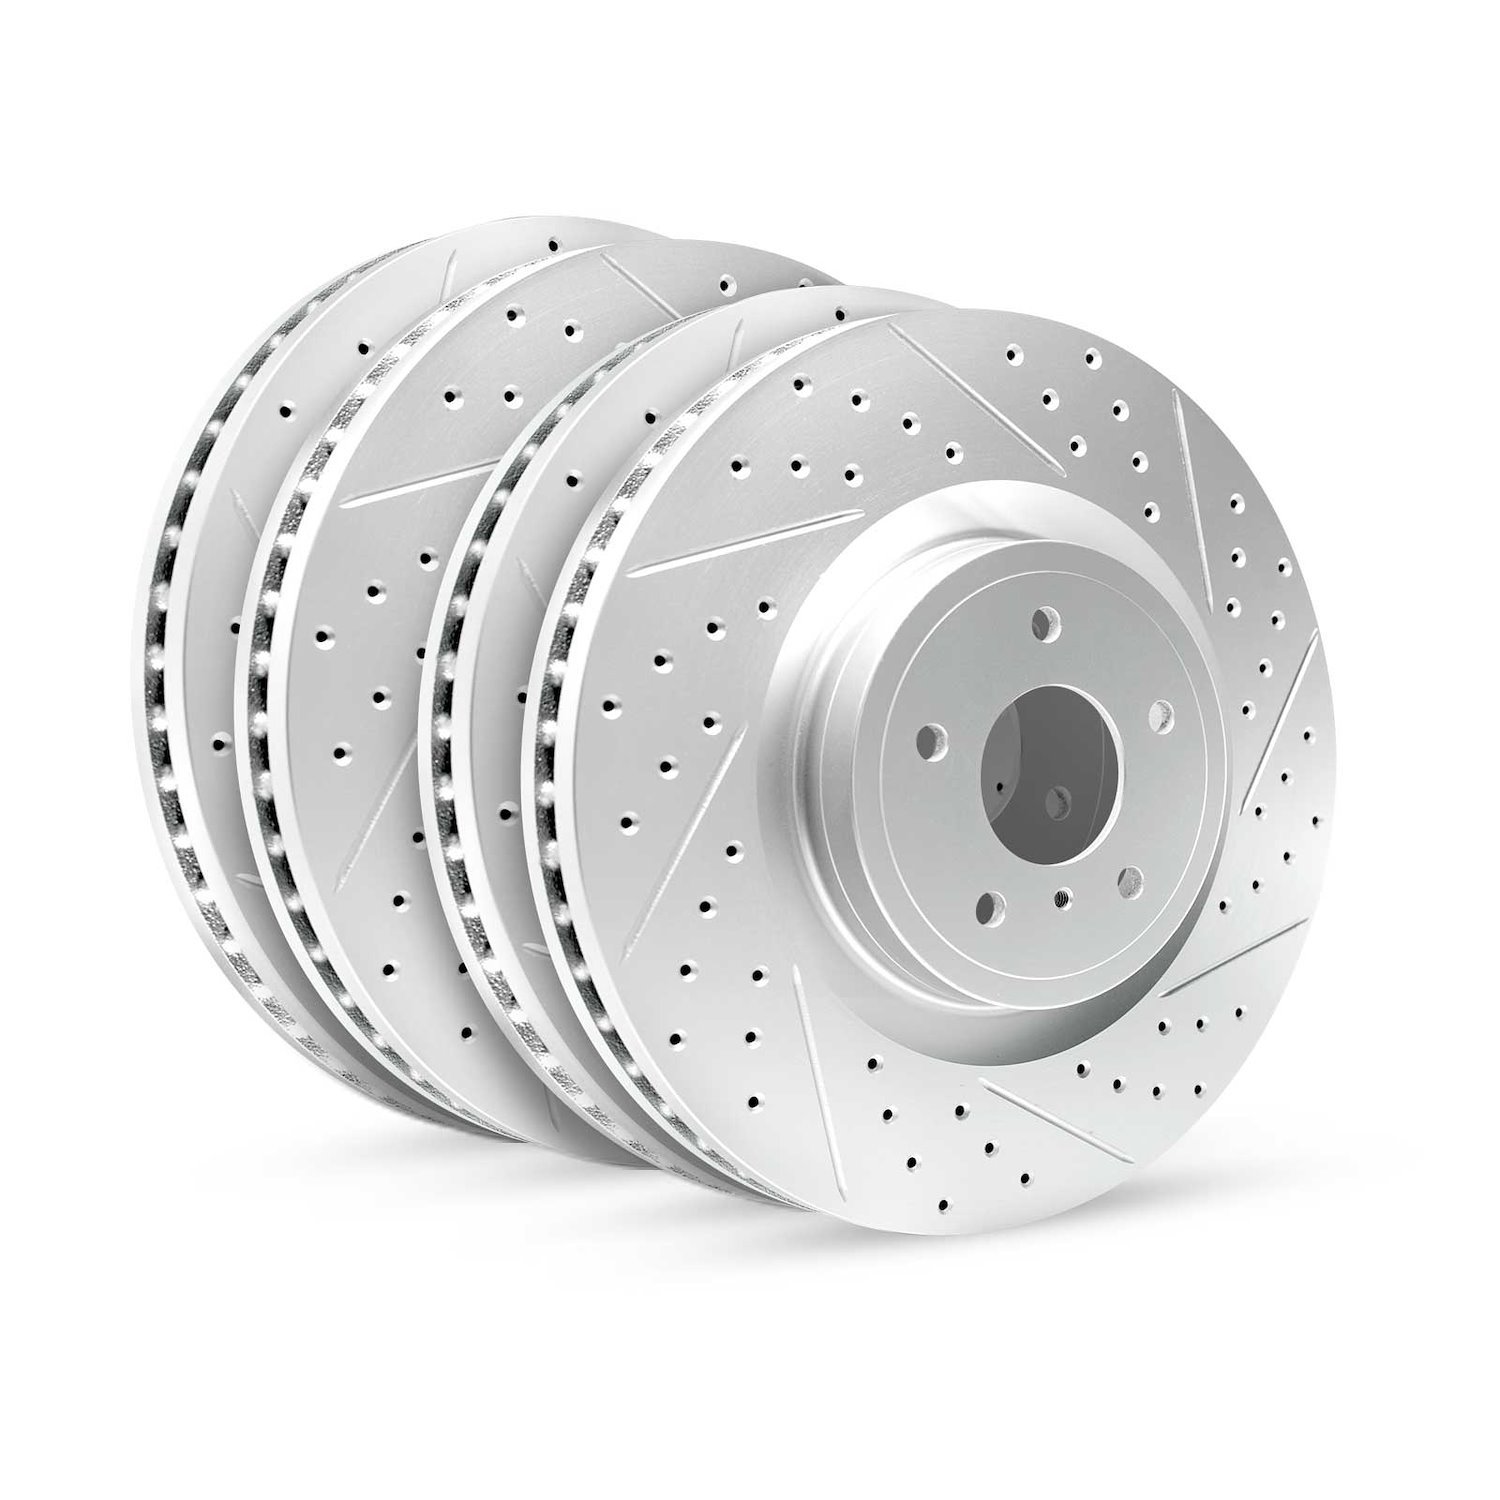 GEO-Carbon Drilled/Slotted Rotors, Fits Select Lexus/Toyota/Scion, Position: Front/Rear